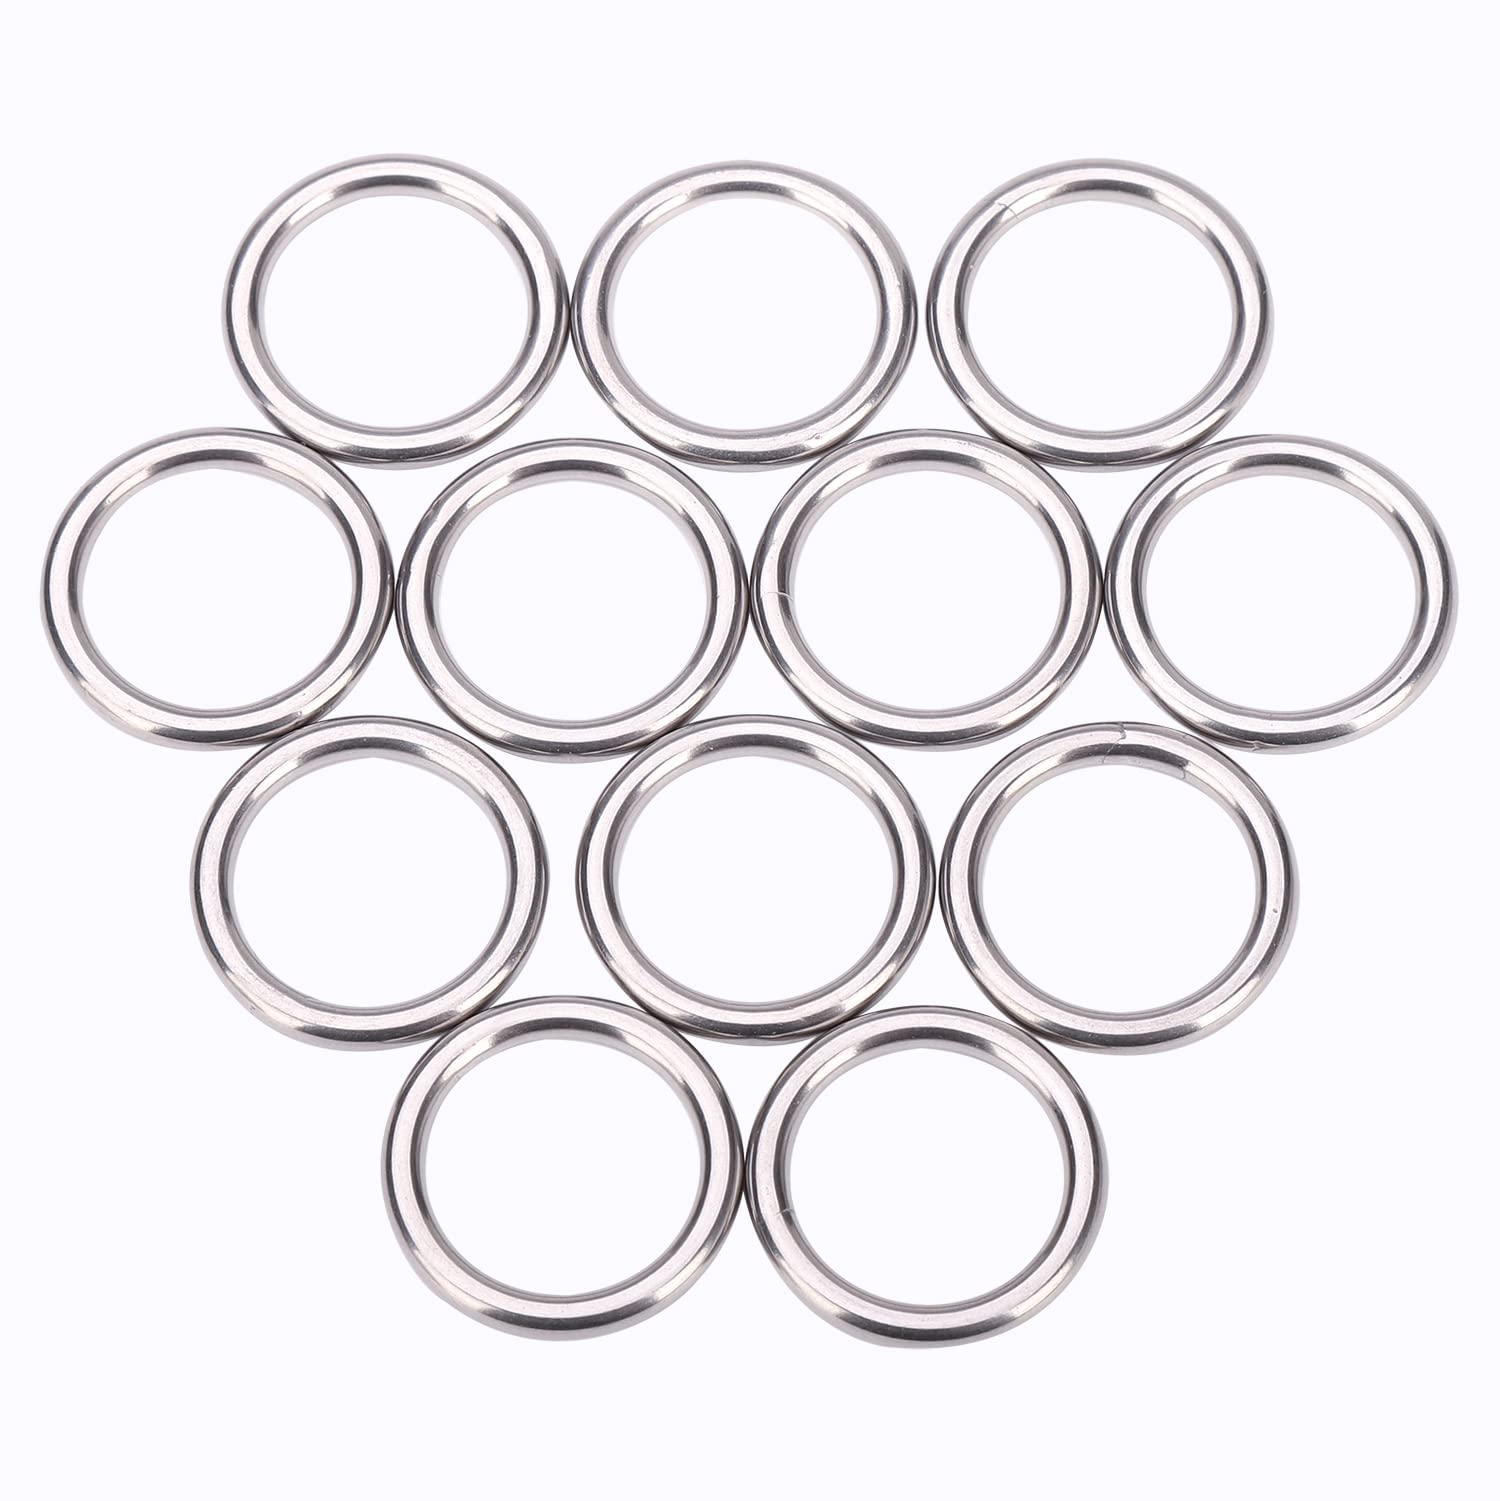  Stainless Steel Key Rings - 10 Pcs ~1inch, 25mm Round